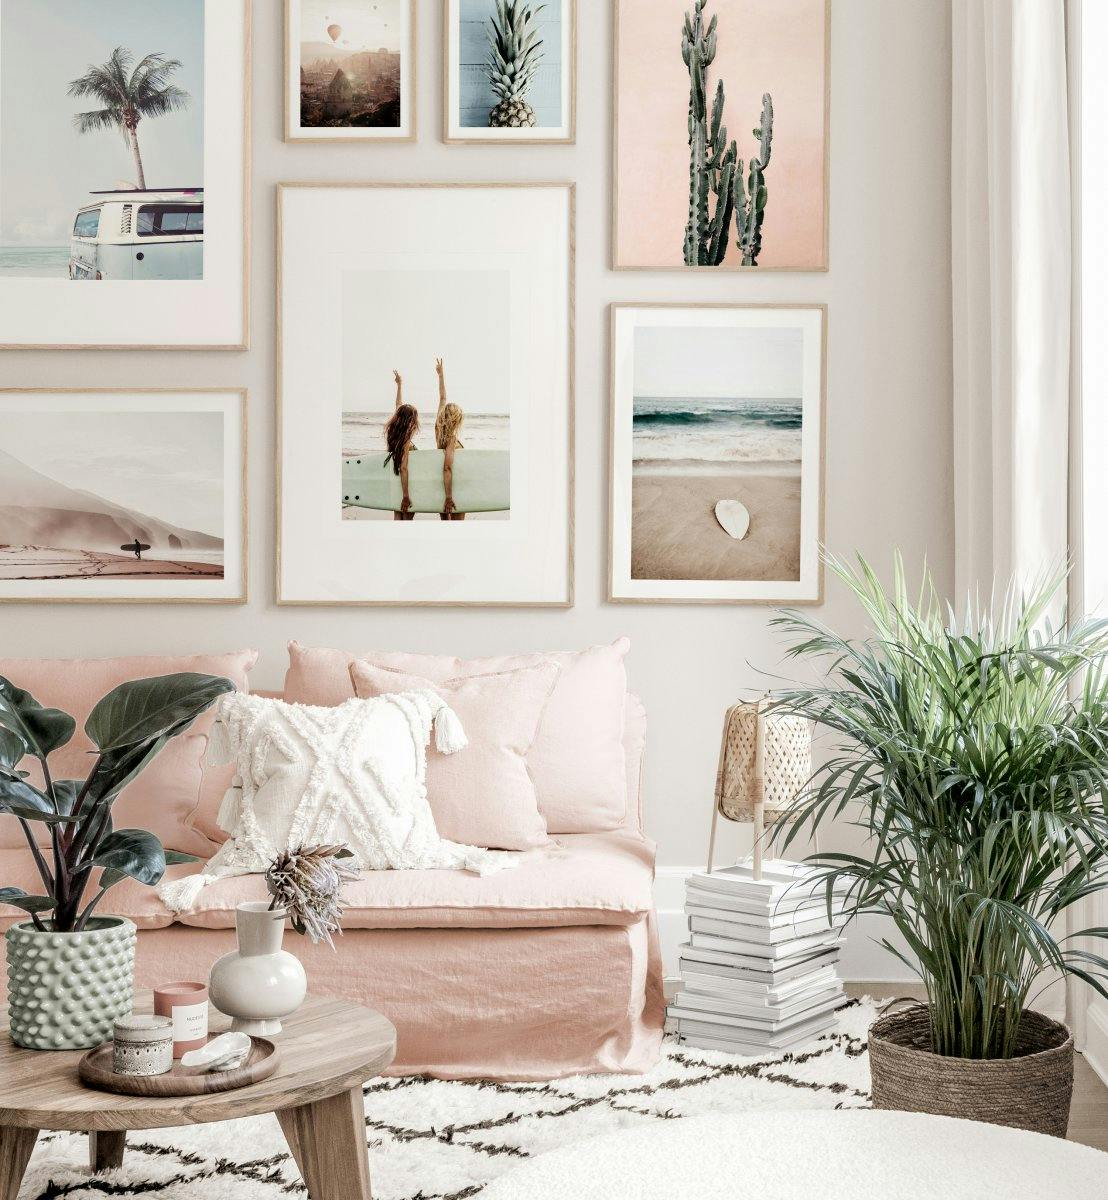 Summery Gallery Wall beach posters surfer style pink white interior oaken frames